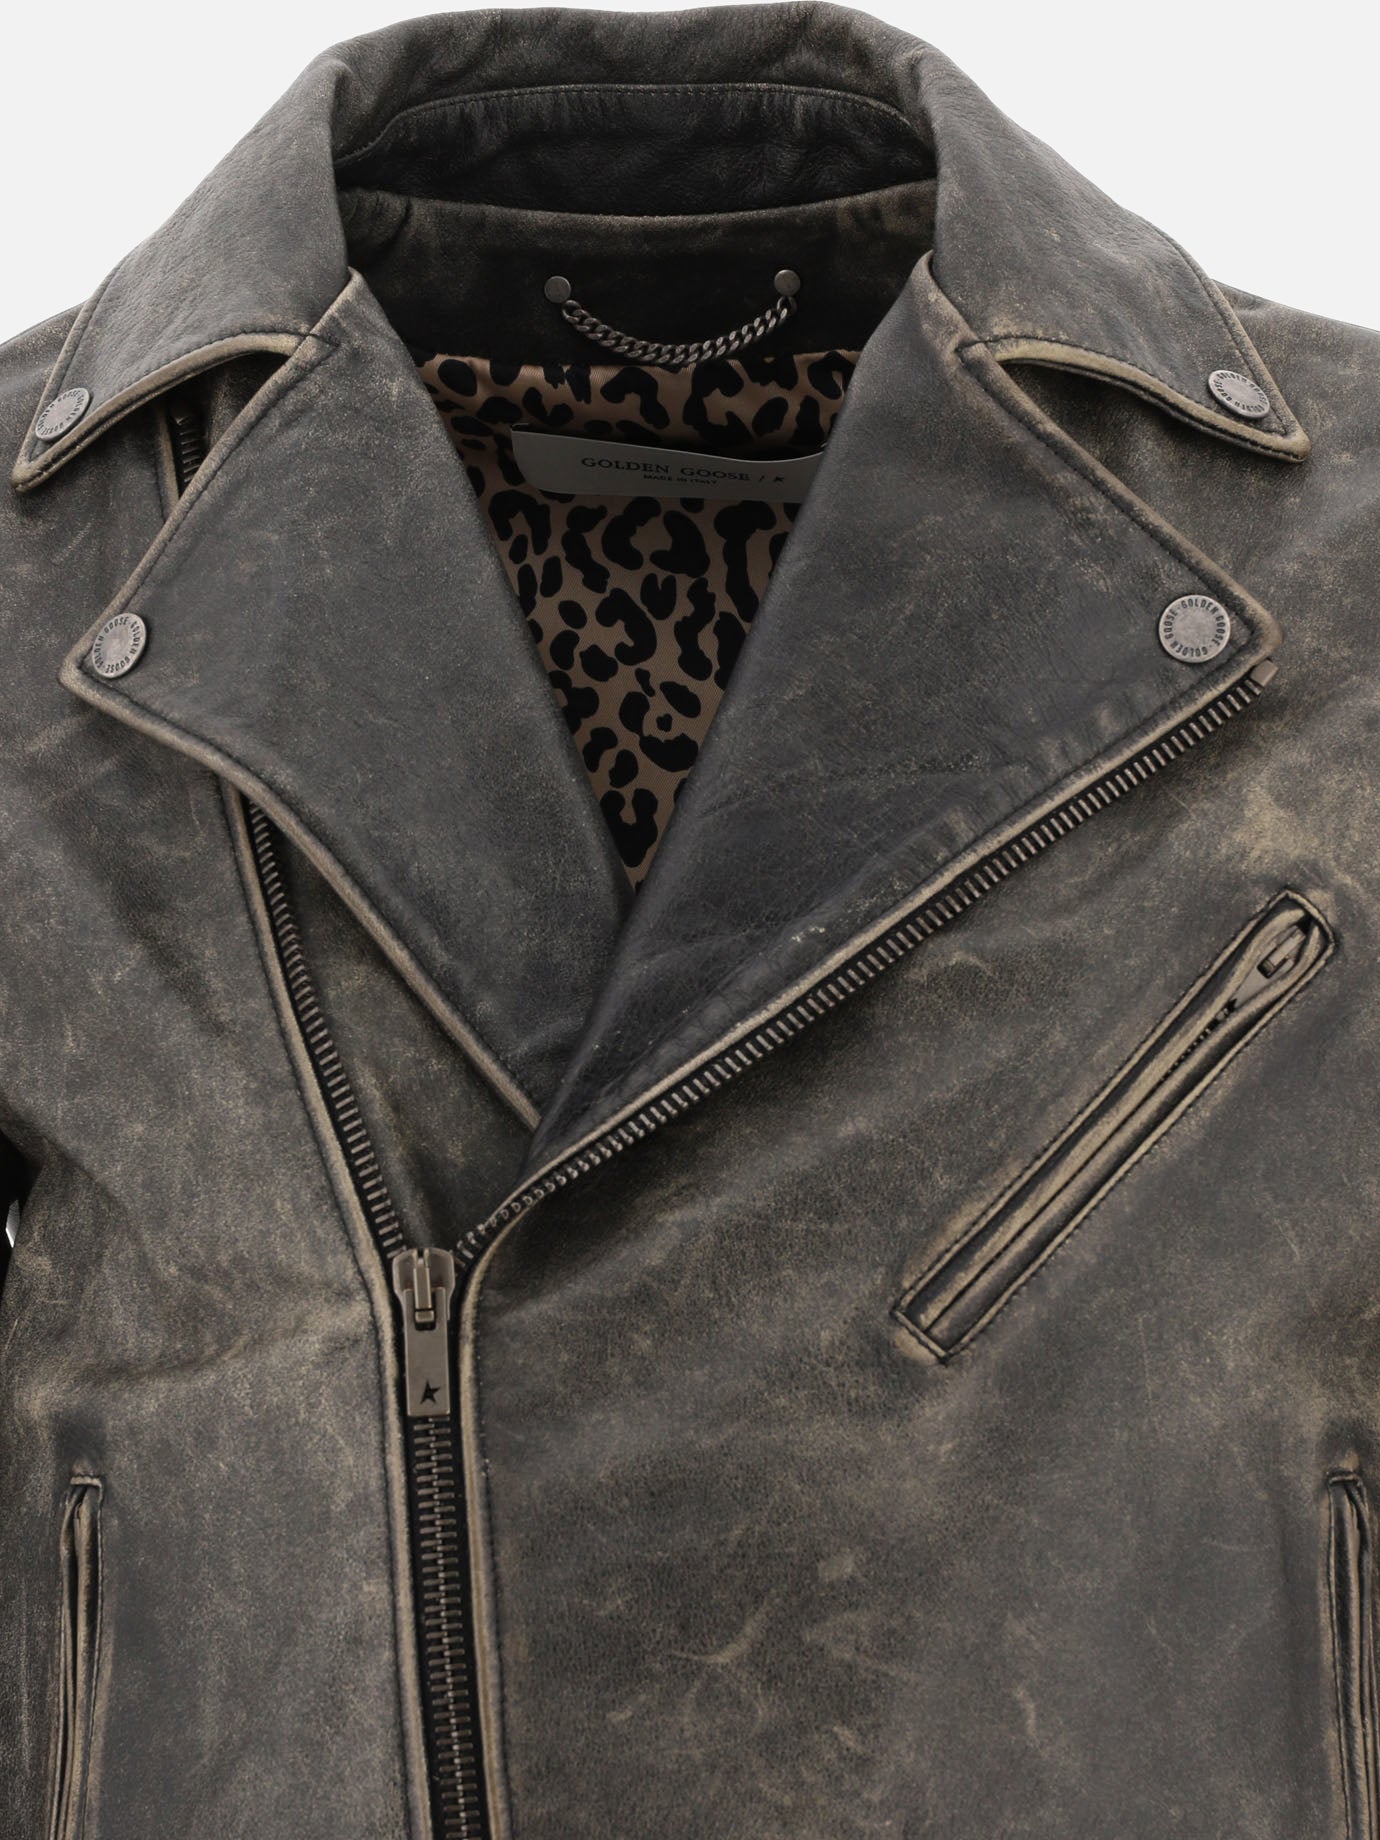 "Chiodo" leather jacket